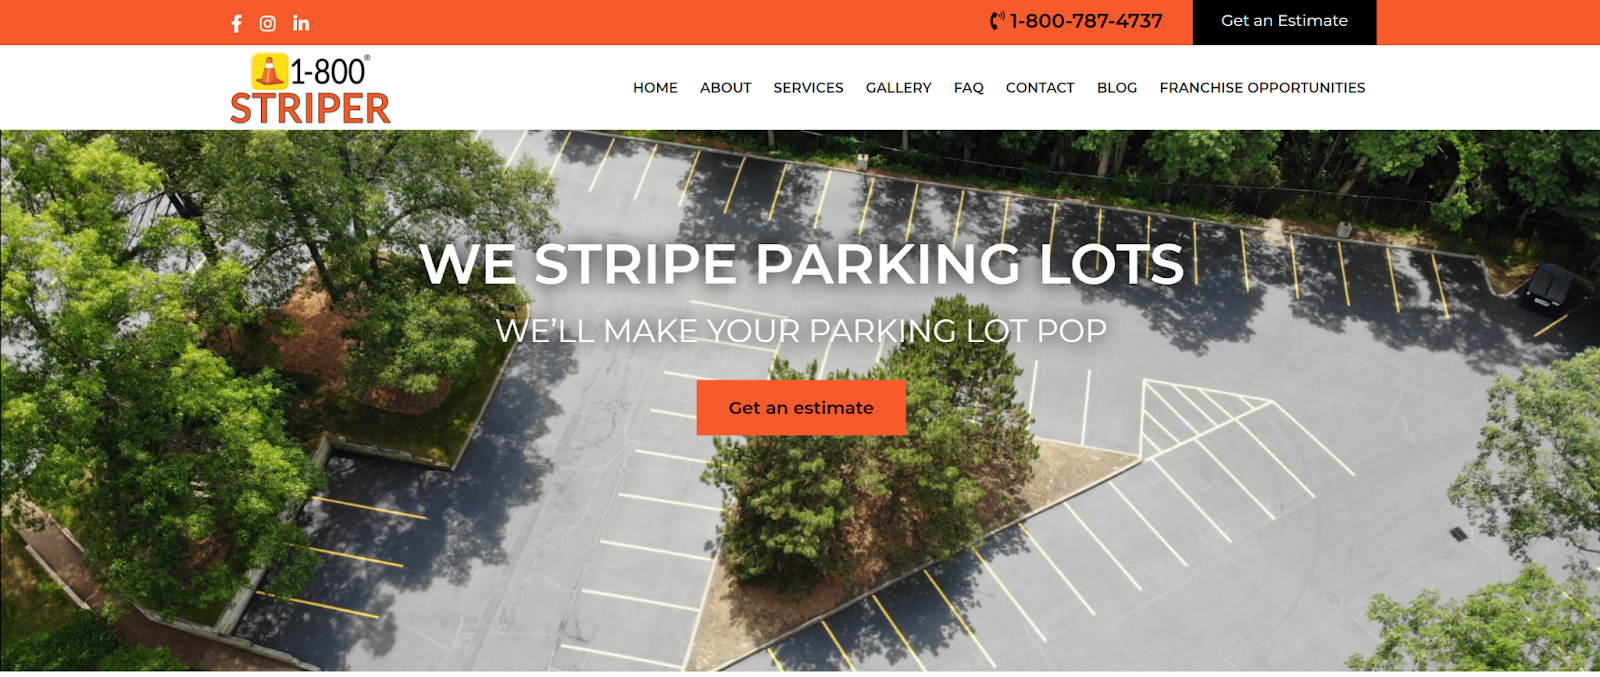 this-husband-wife-started-a-739k-year-parking-lot-striping-business